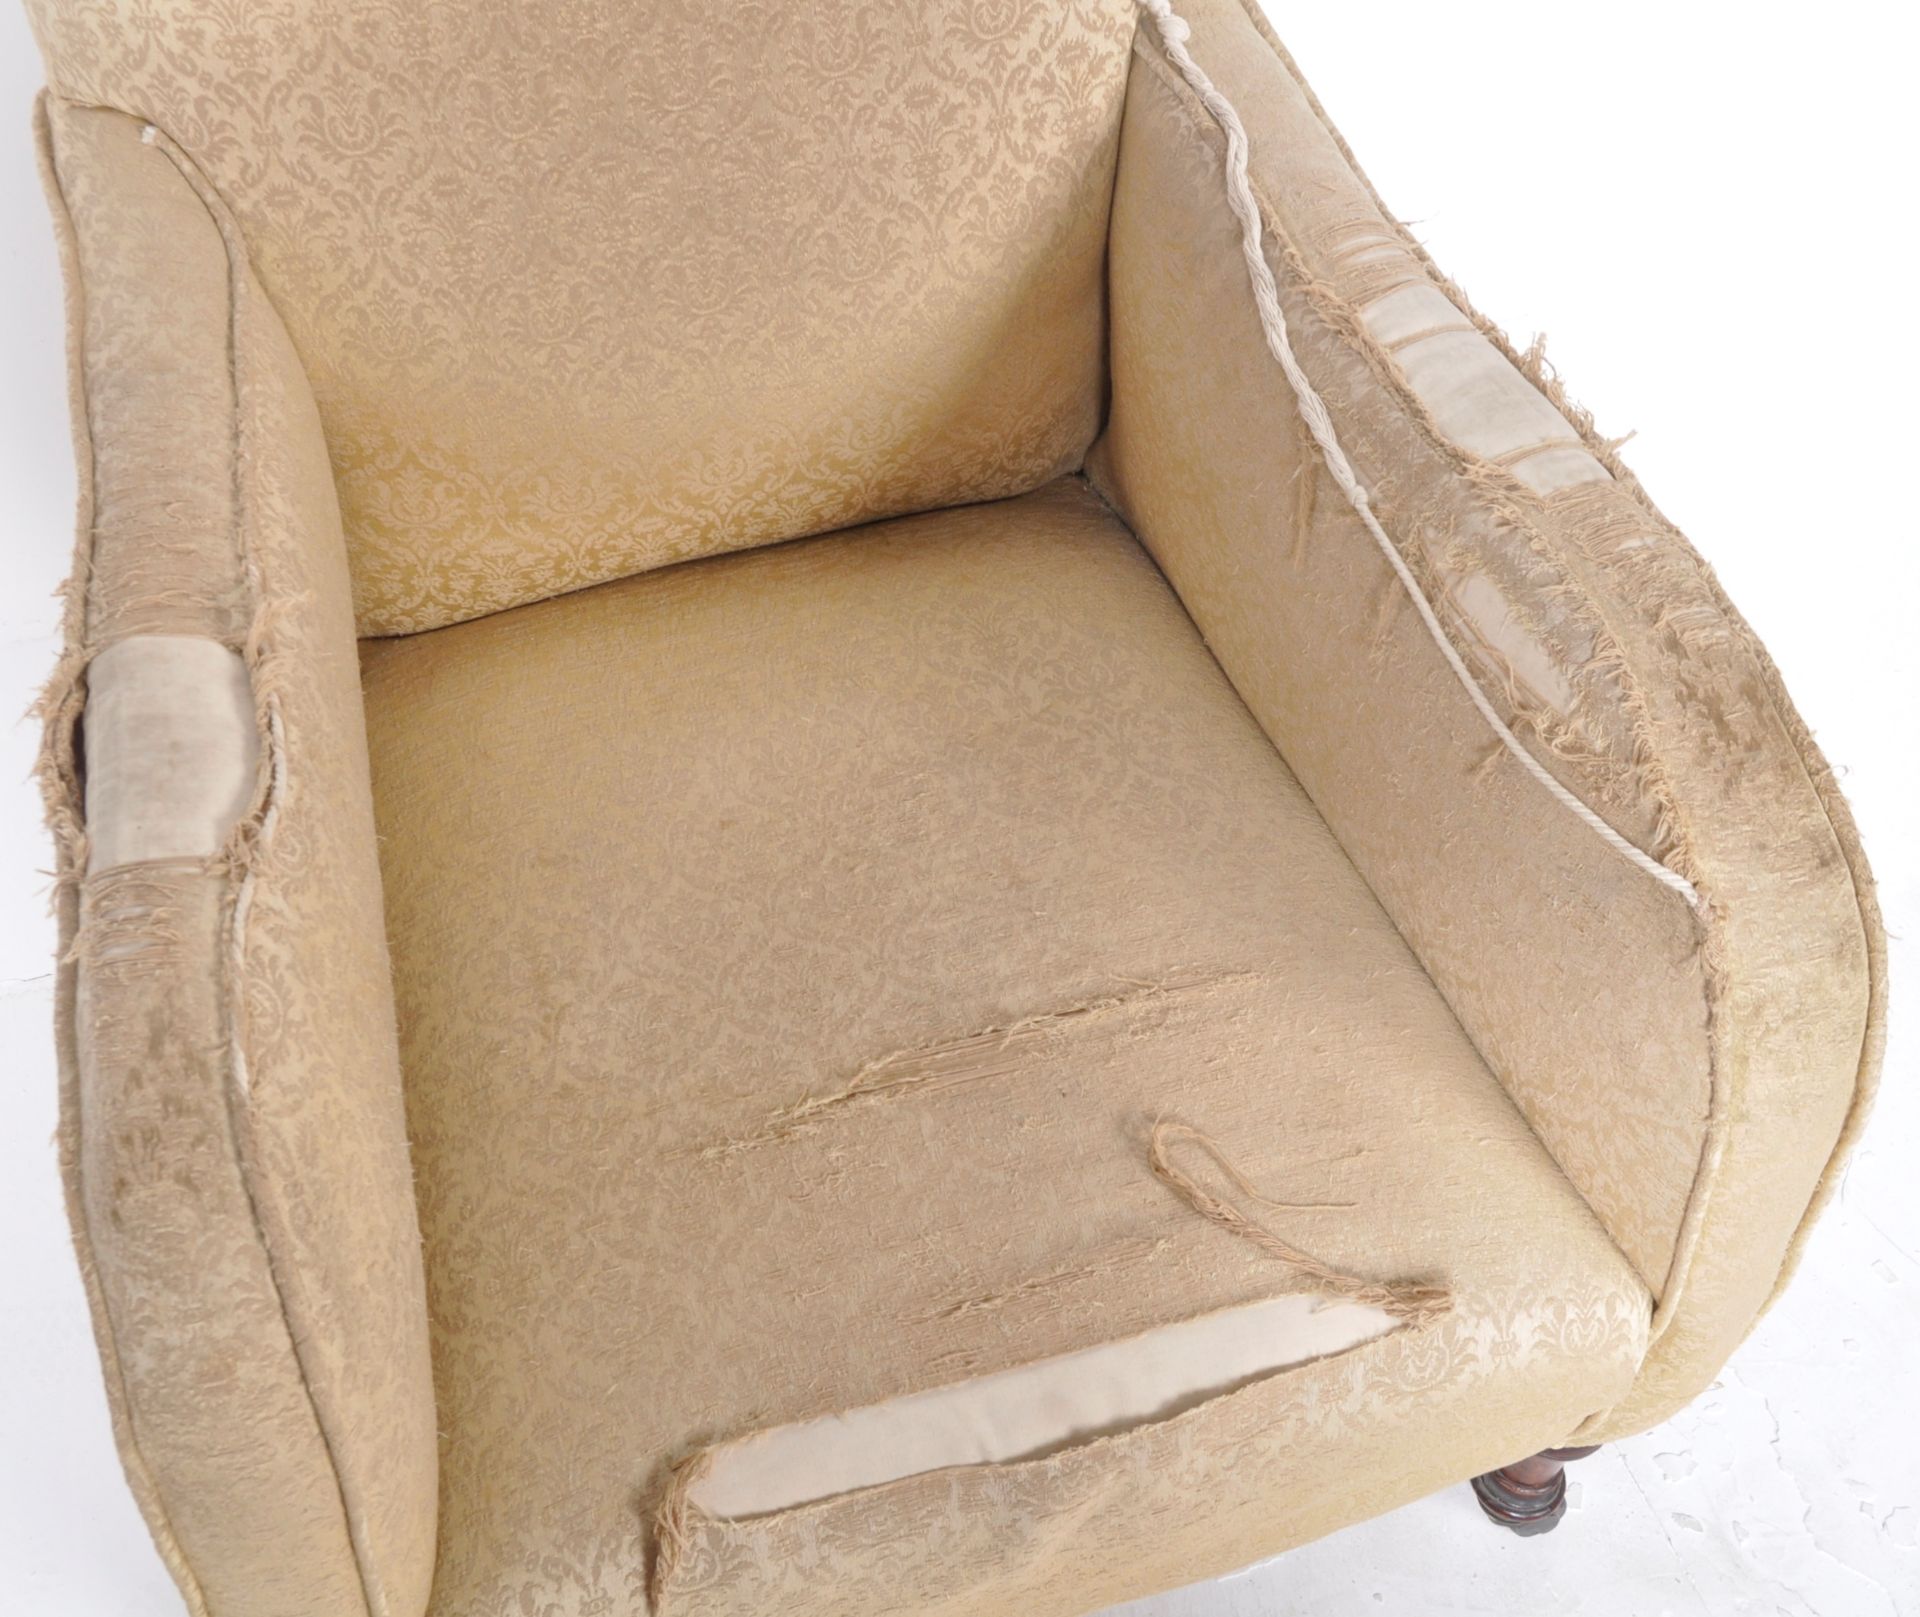 19TH CENTURY VICTORIAN PADDED ARMCHAIR - Image 4 of 8